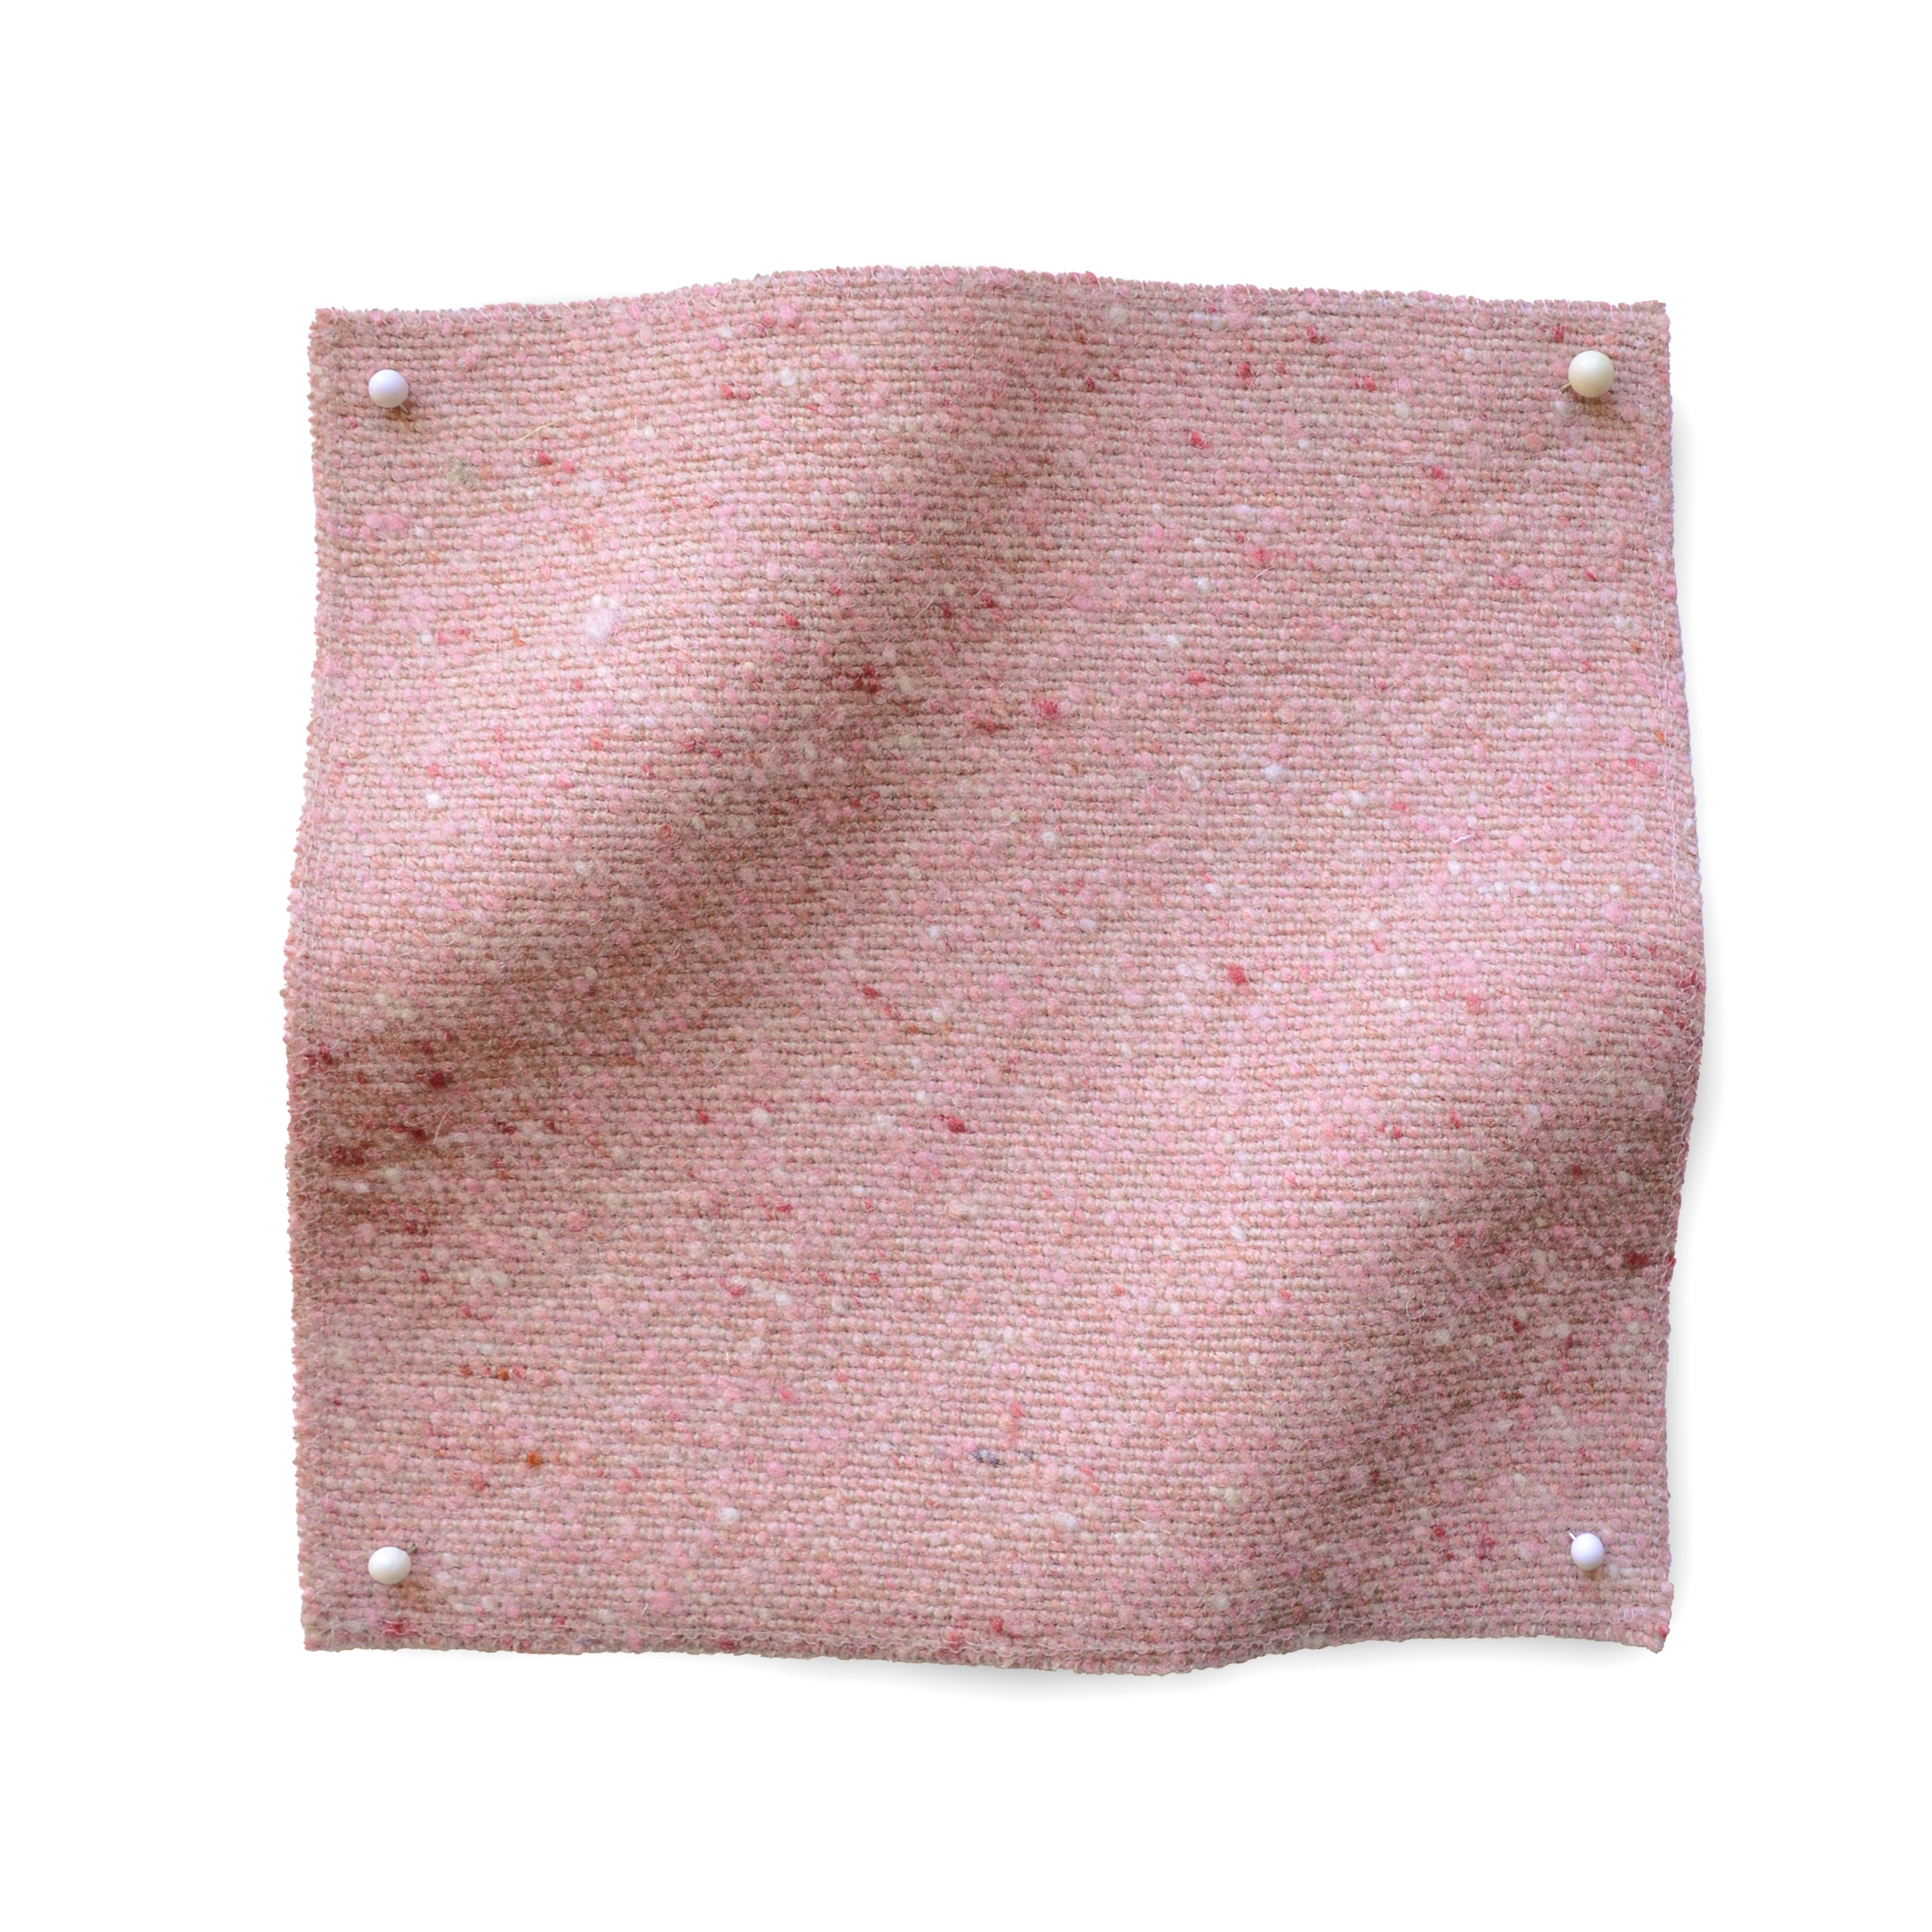 Square fabric swatch of heathered wool in a pink colorway.